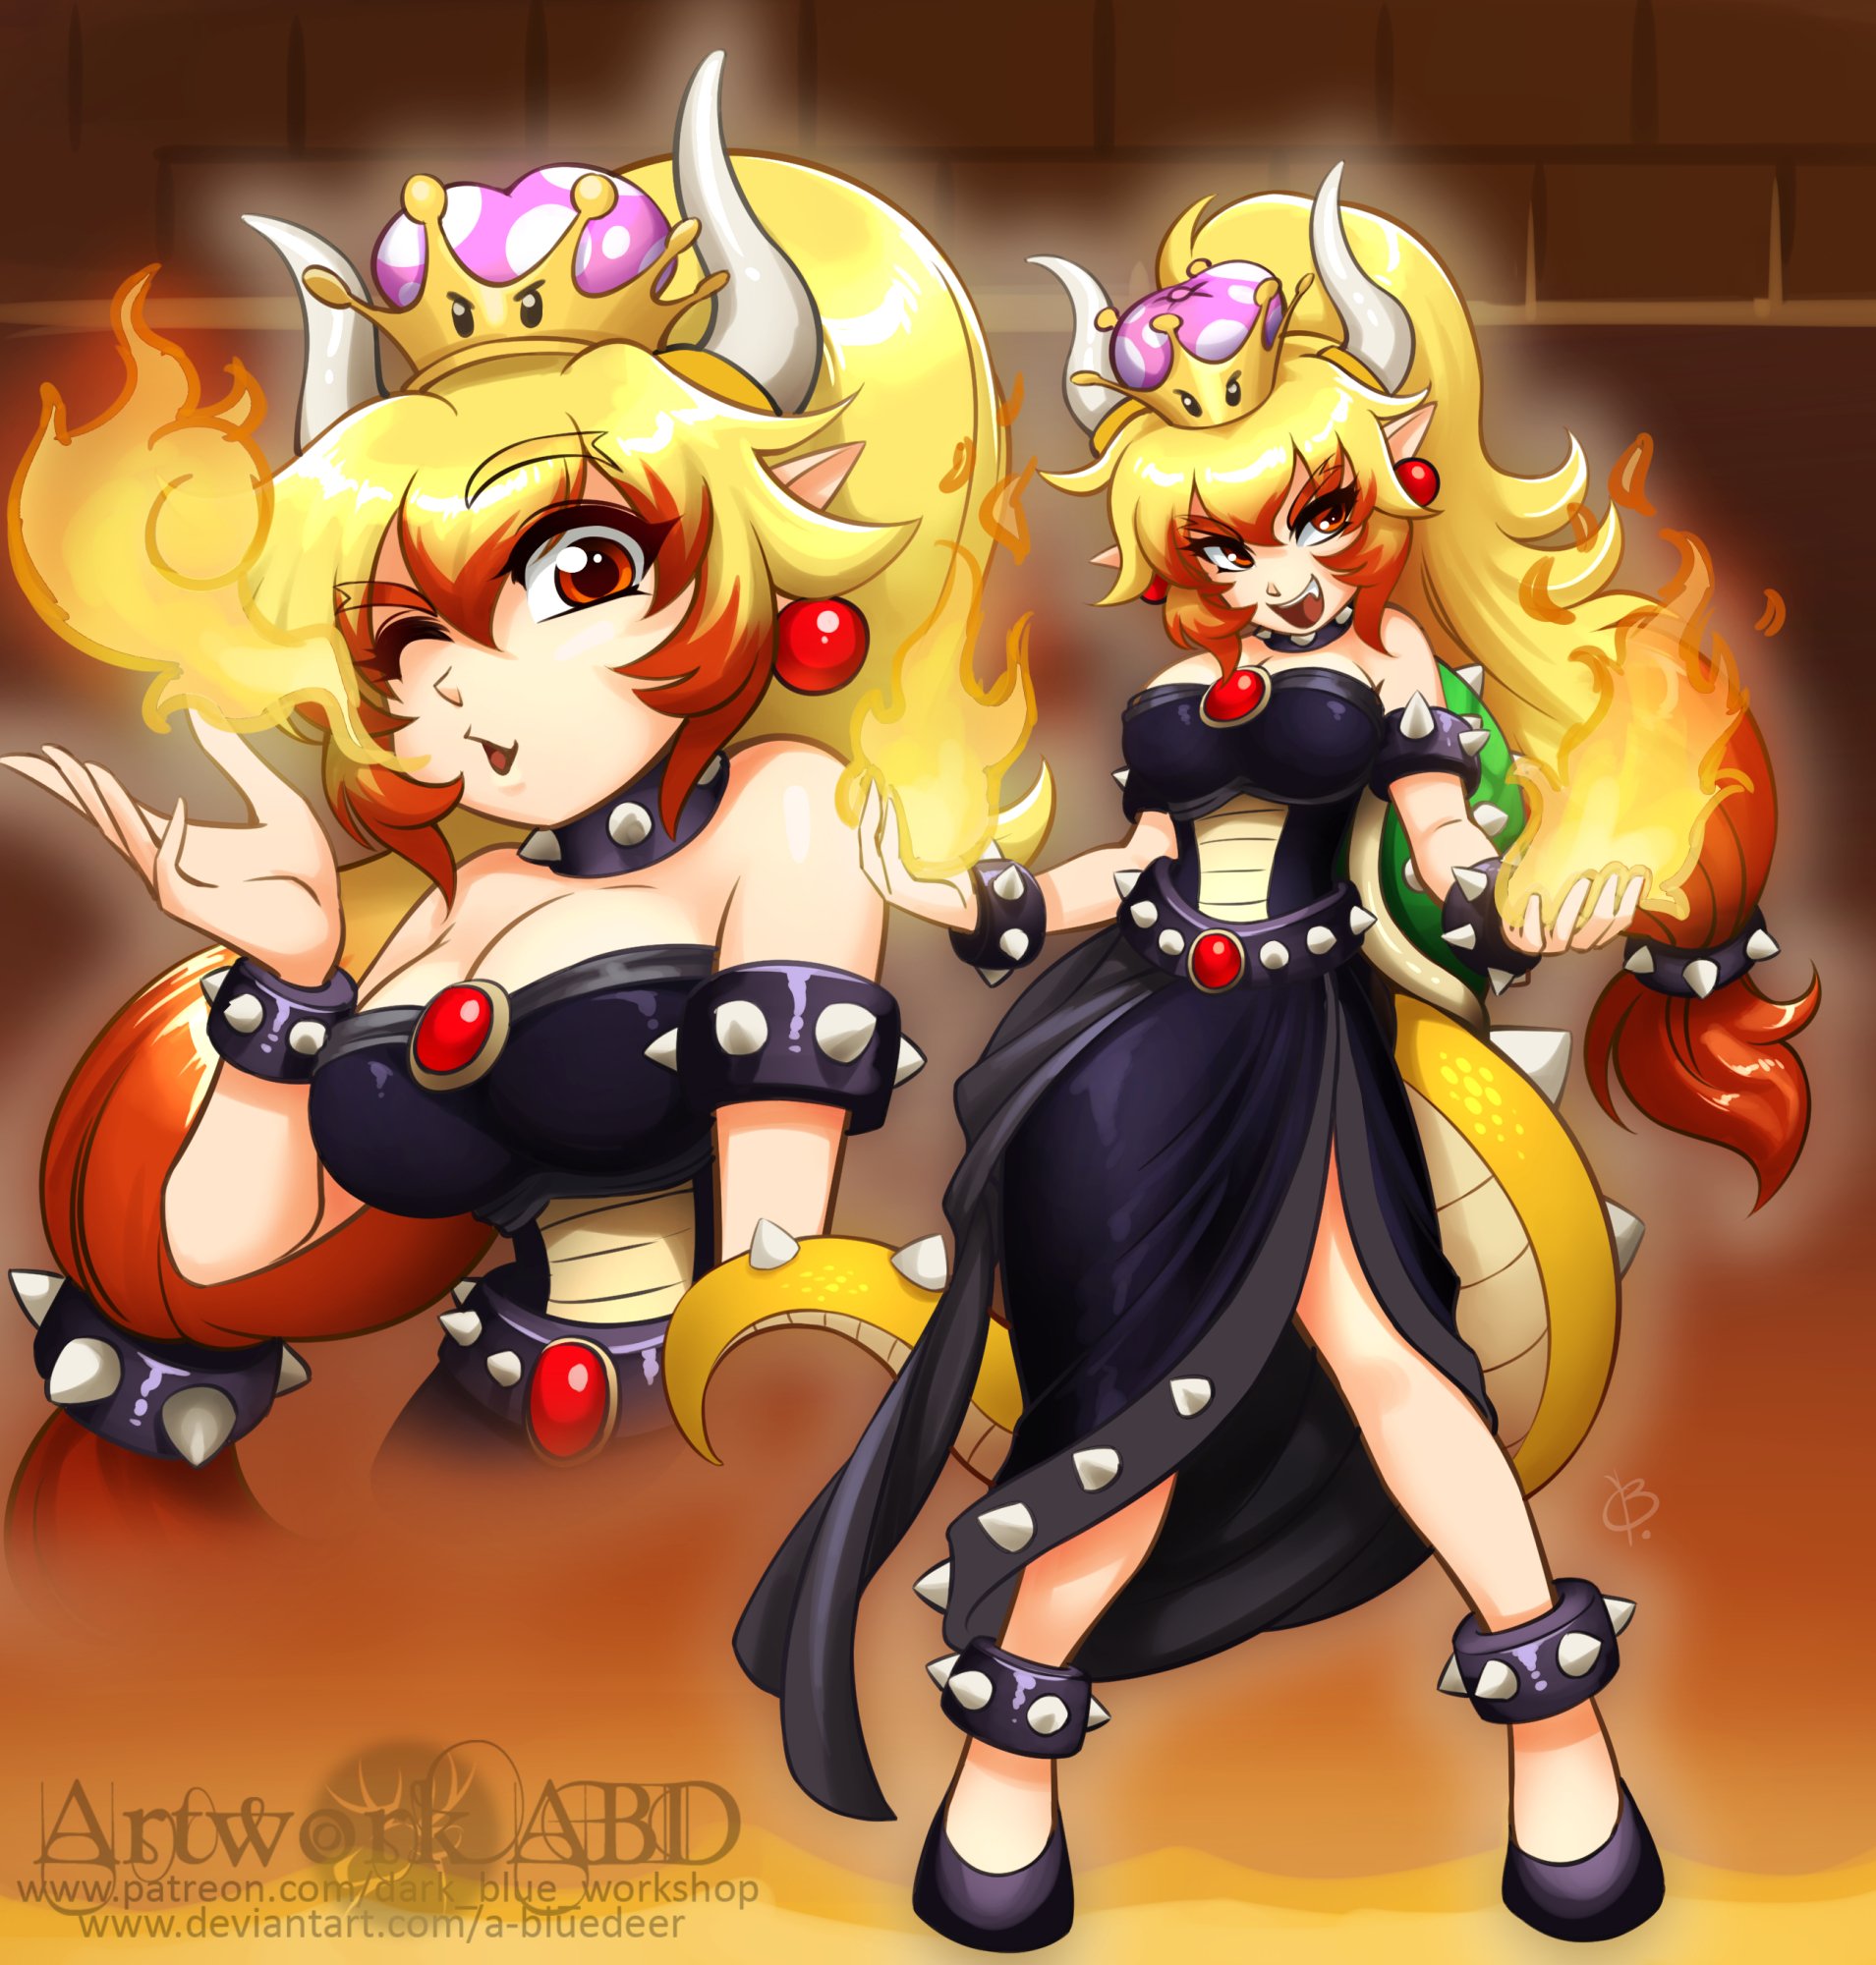 Here's some #Bowsette for all my fans! #bowserette #bowserpeach #B...